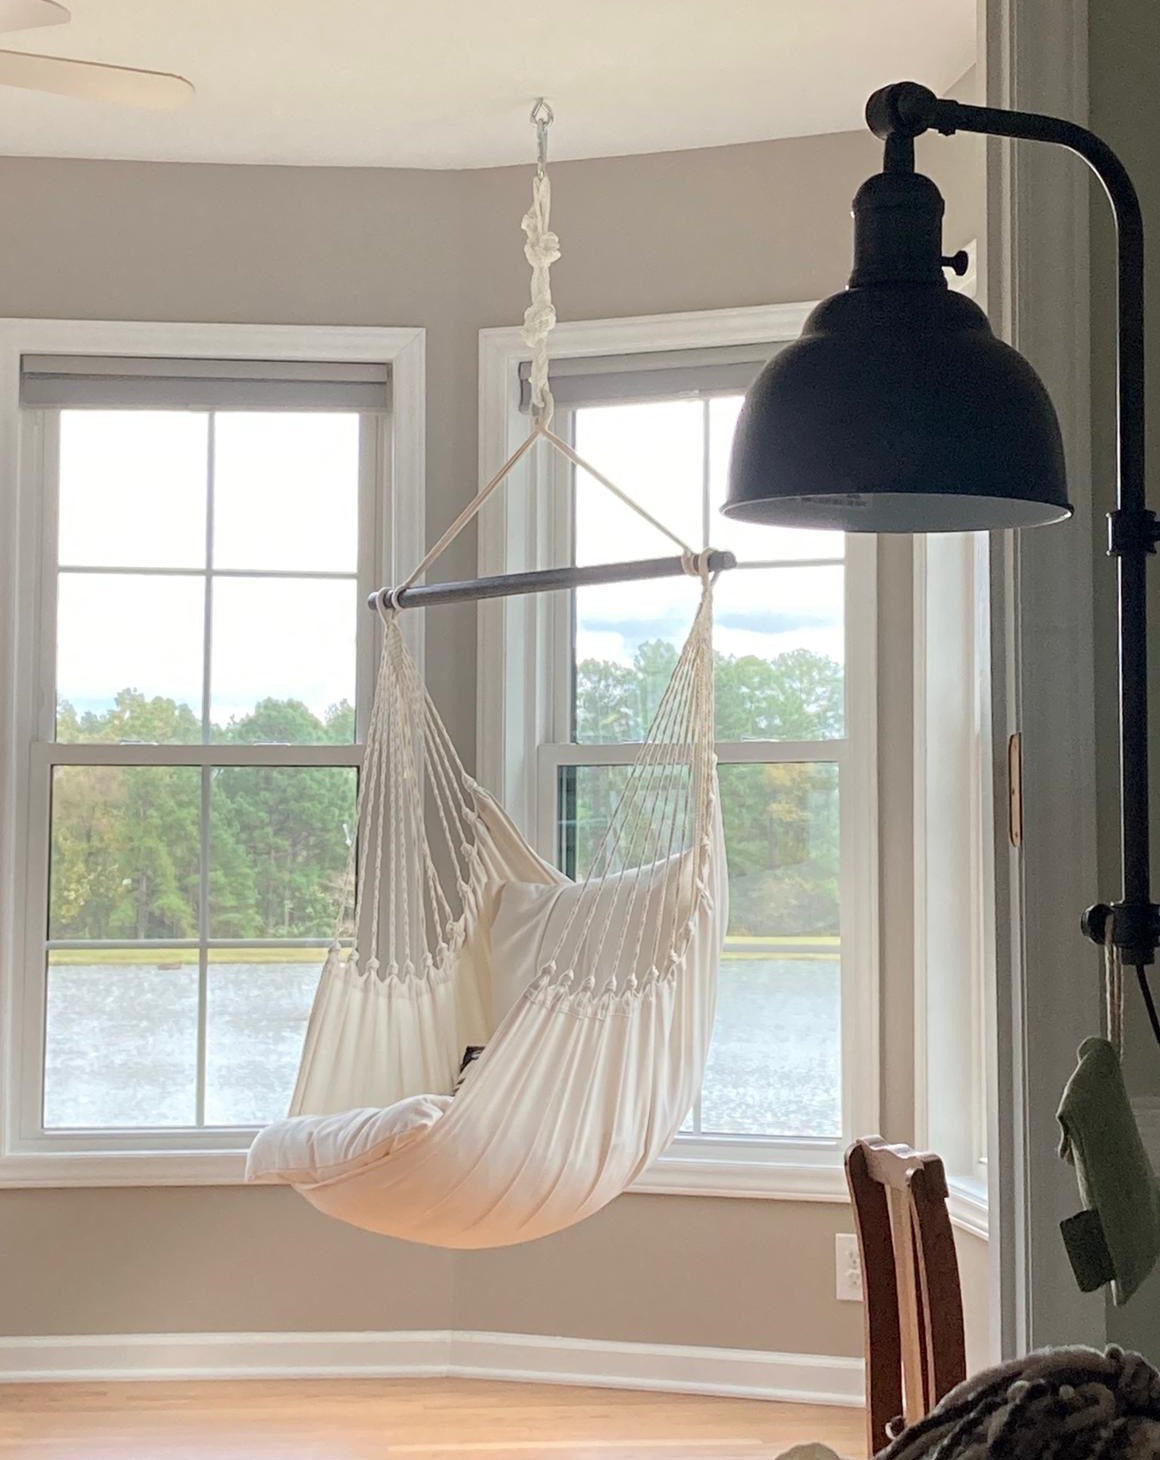 White Hanging hammock chair swing next to a window